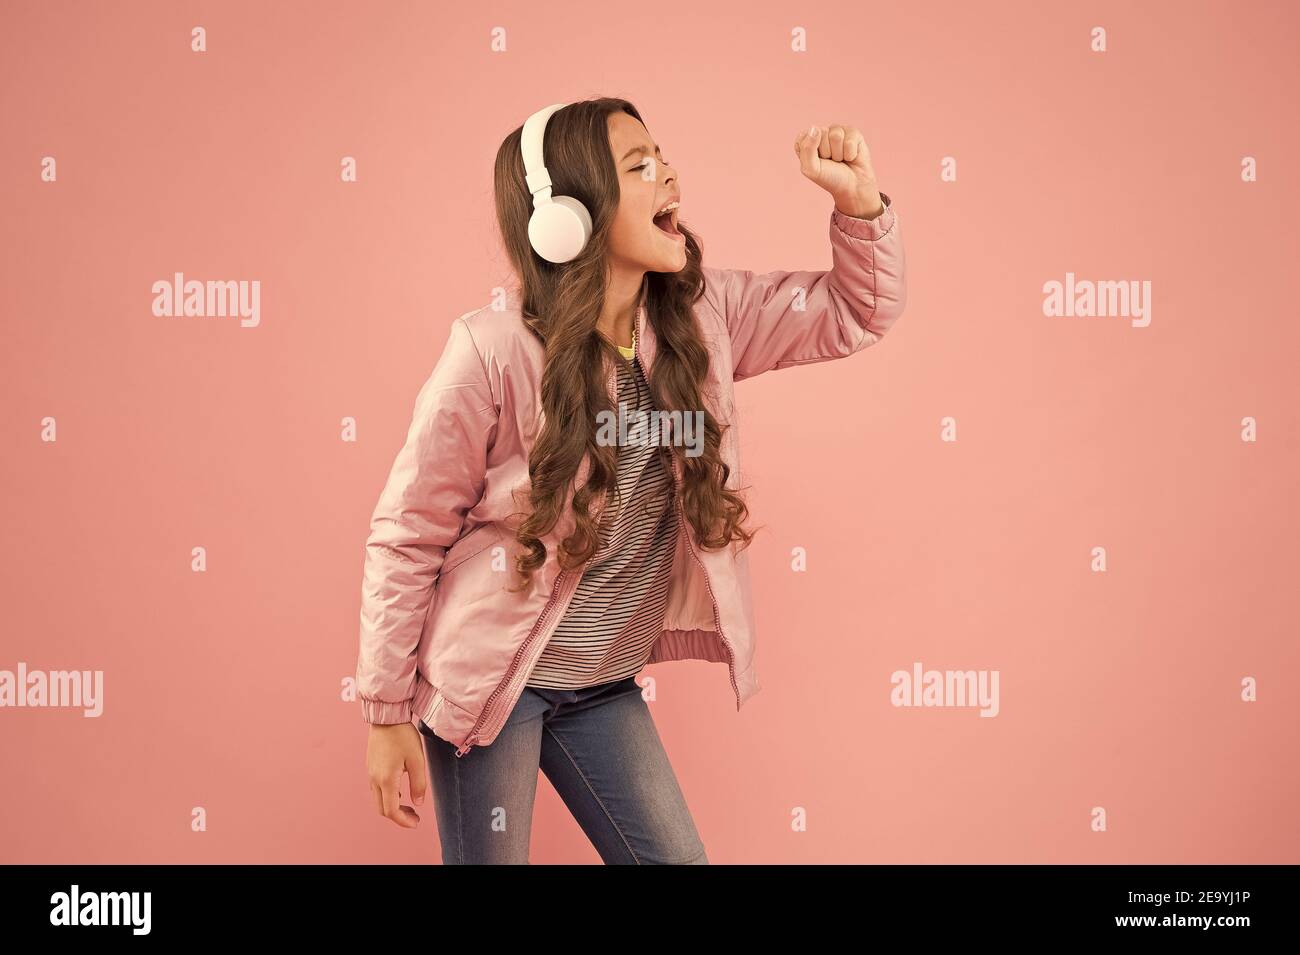 Imagine she is a star. Karaoke party fun. Fun and entertainment. Joining in a song. Small girl with sad look pink background. Little child hear stereo sound. Enjoying song playing in headphones. Stock Photo